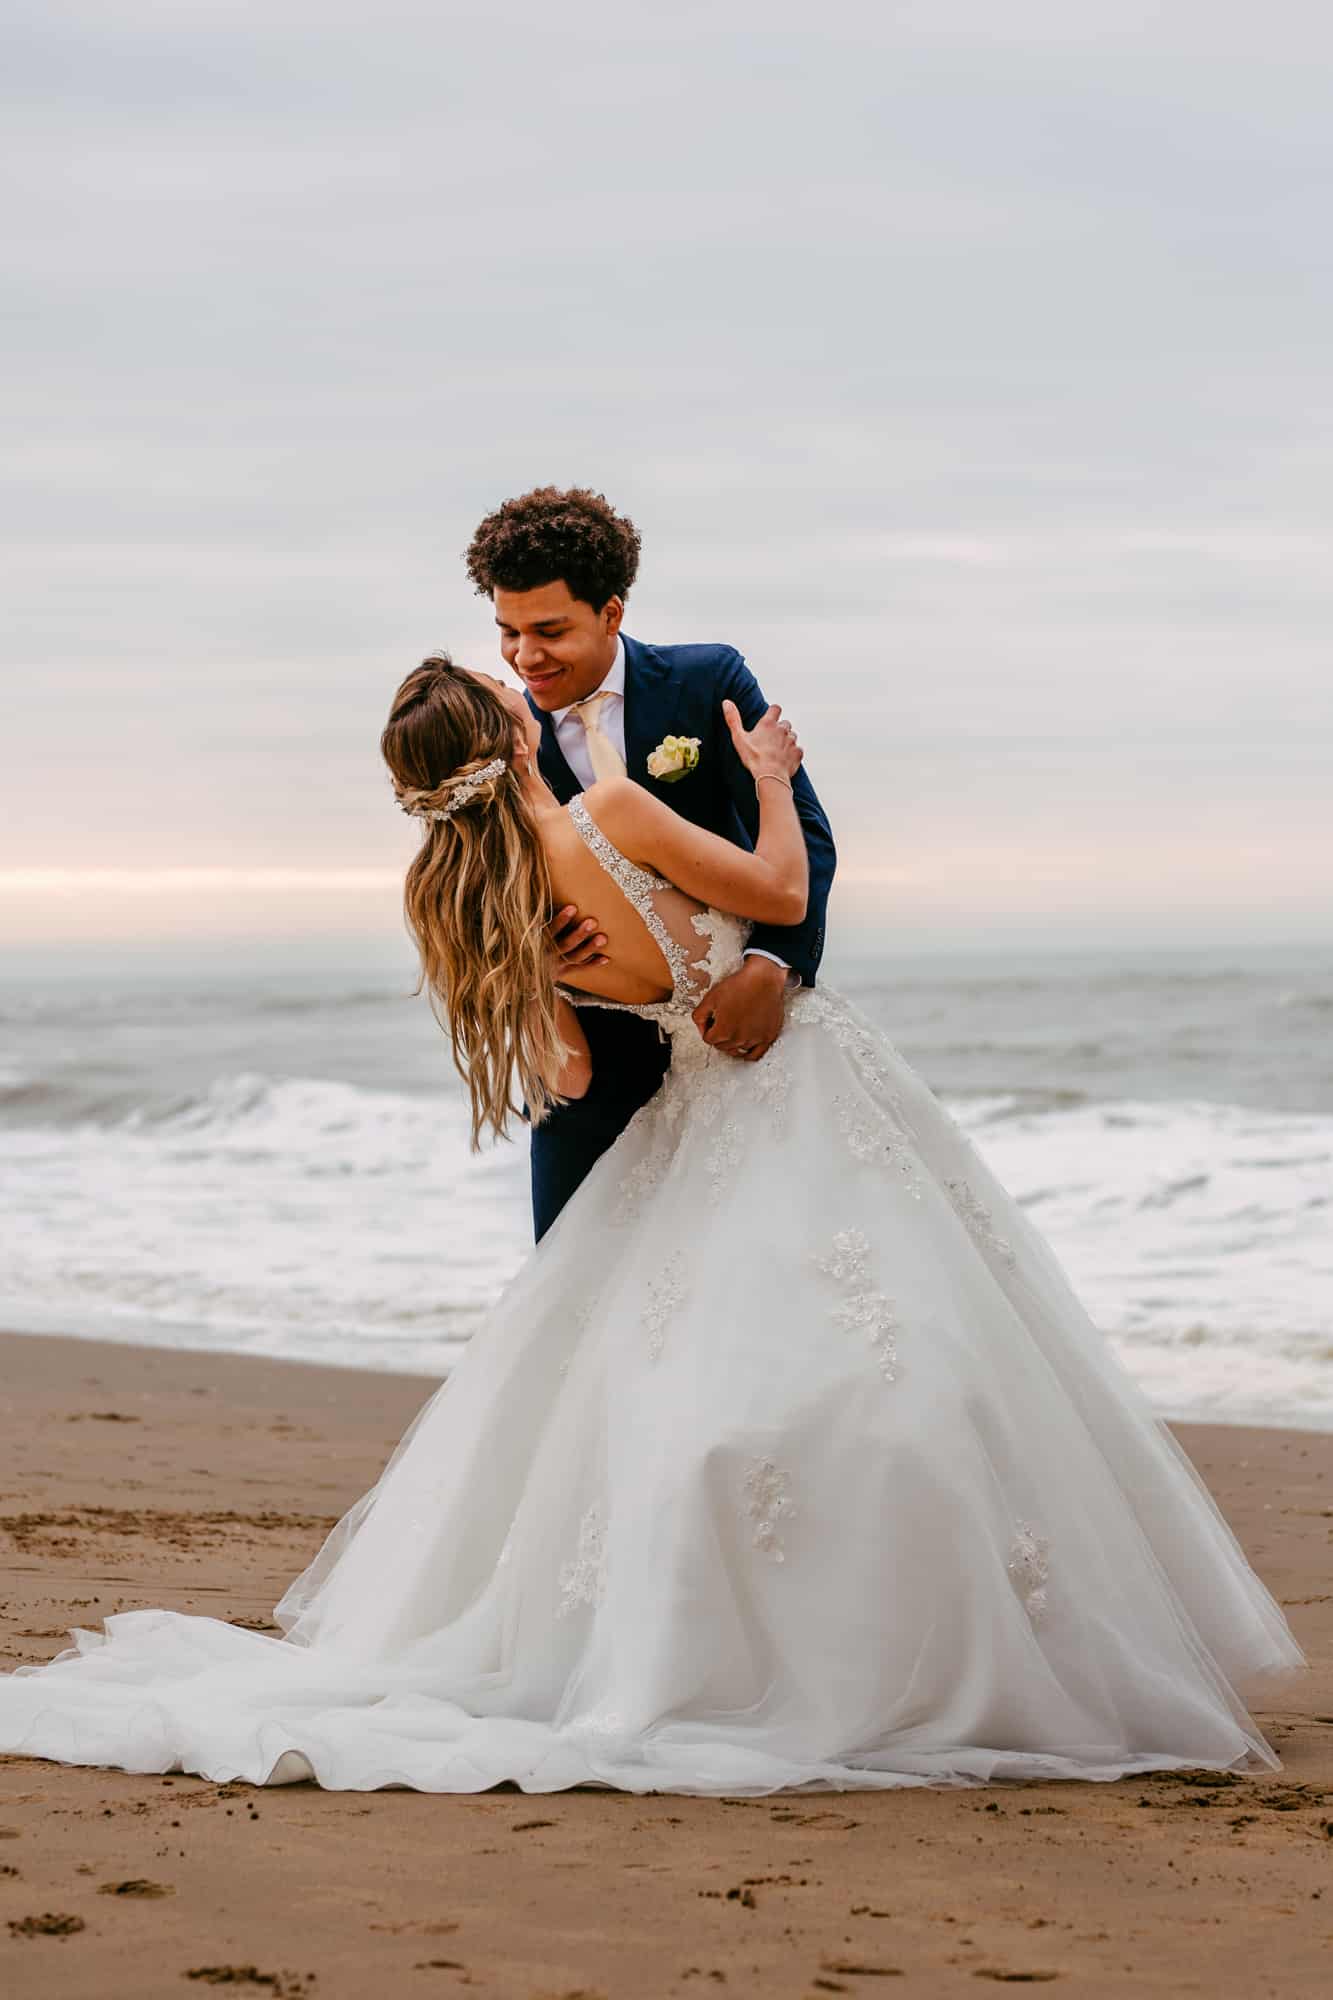 A bride and groom sharing a romantic kiss on the beach, with the bride wearing a beautiful A-line wedding dress.